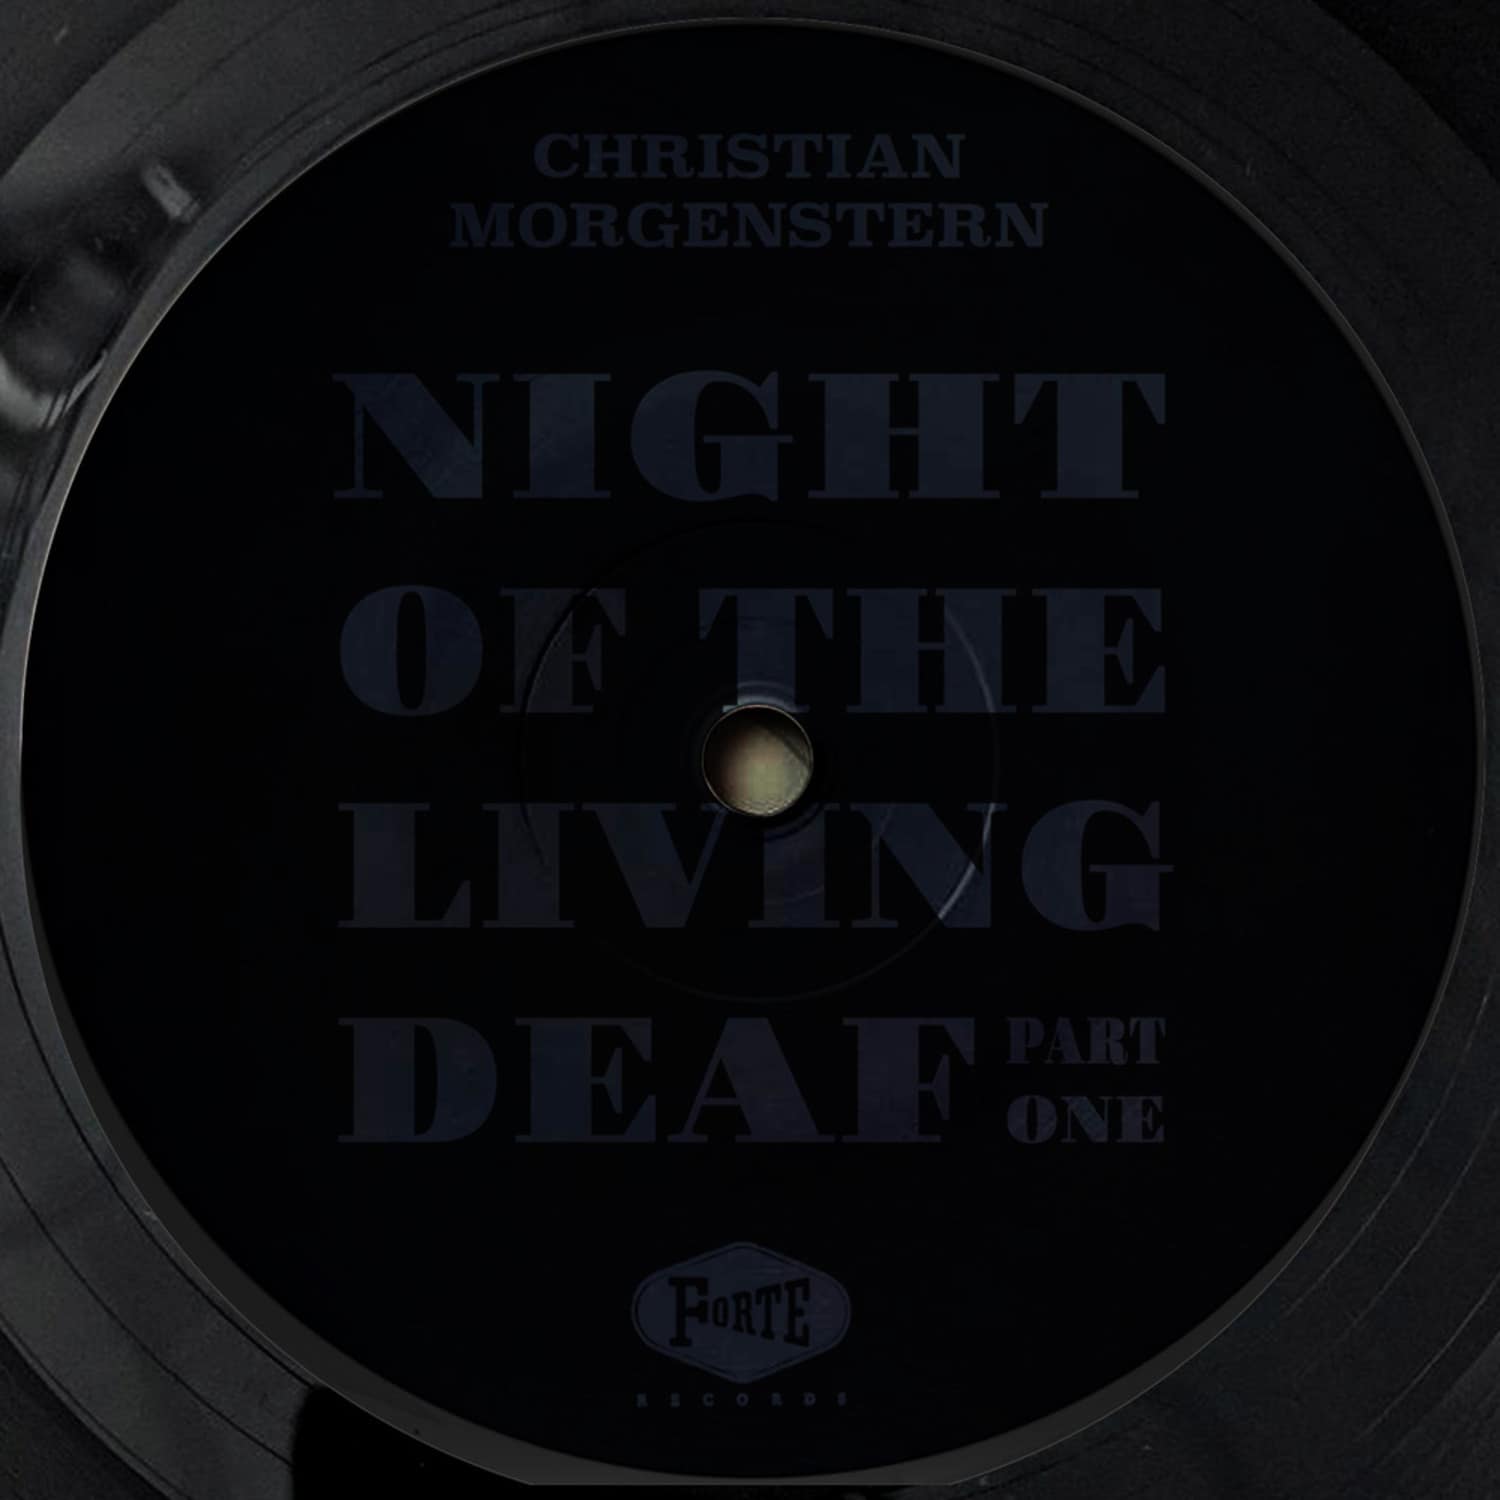 Christian Morgenstern - NIGHT OF THE LIVING DEAF PART 1